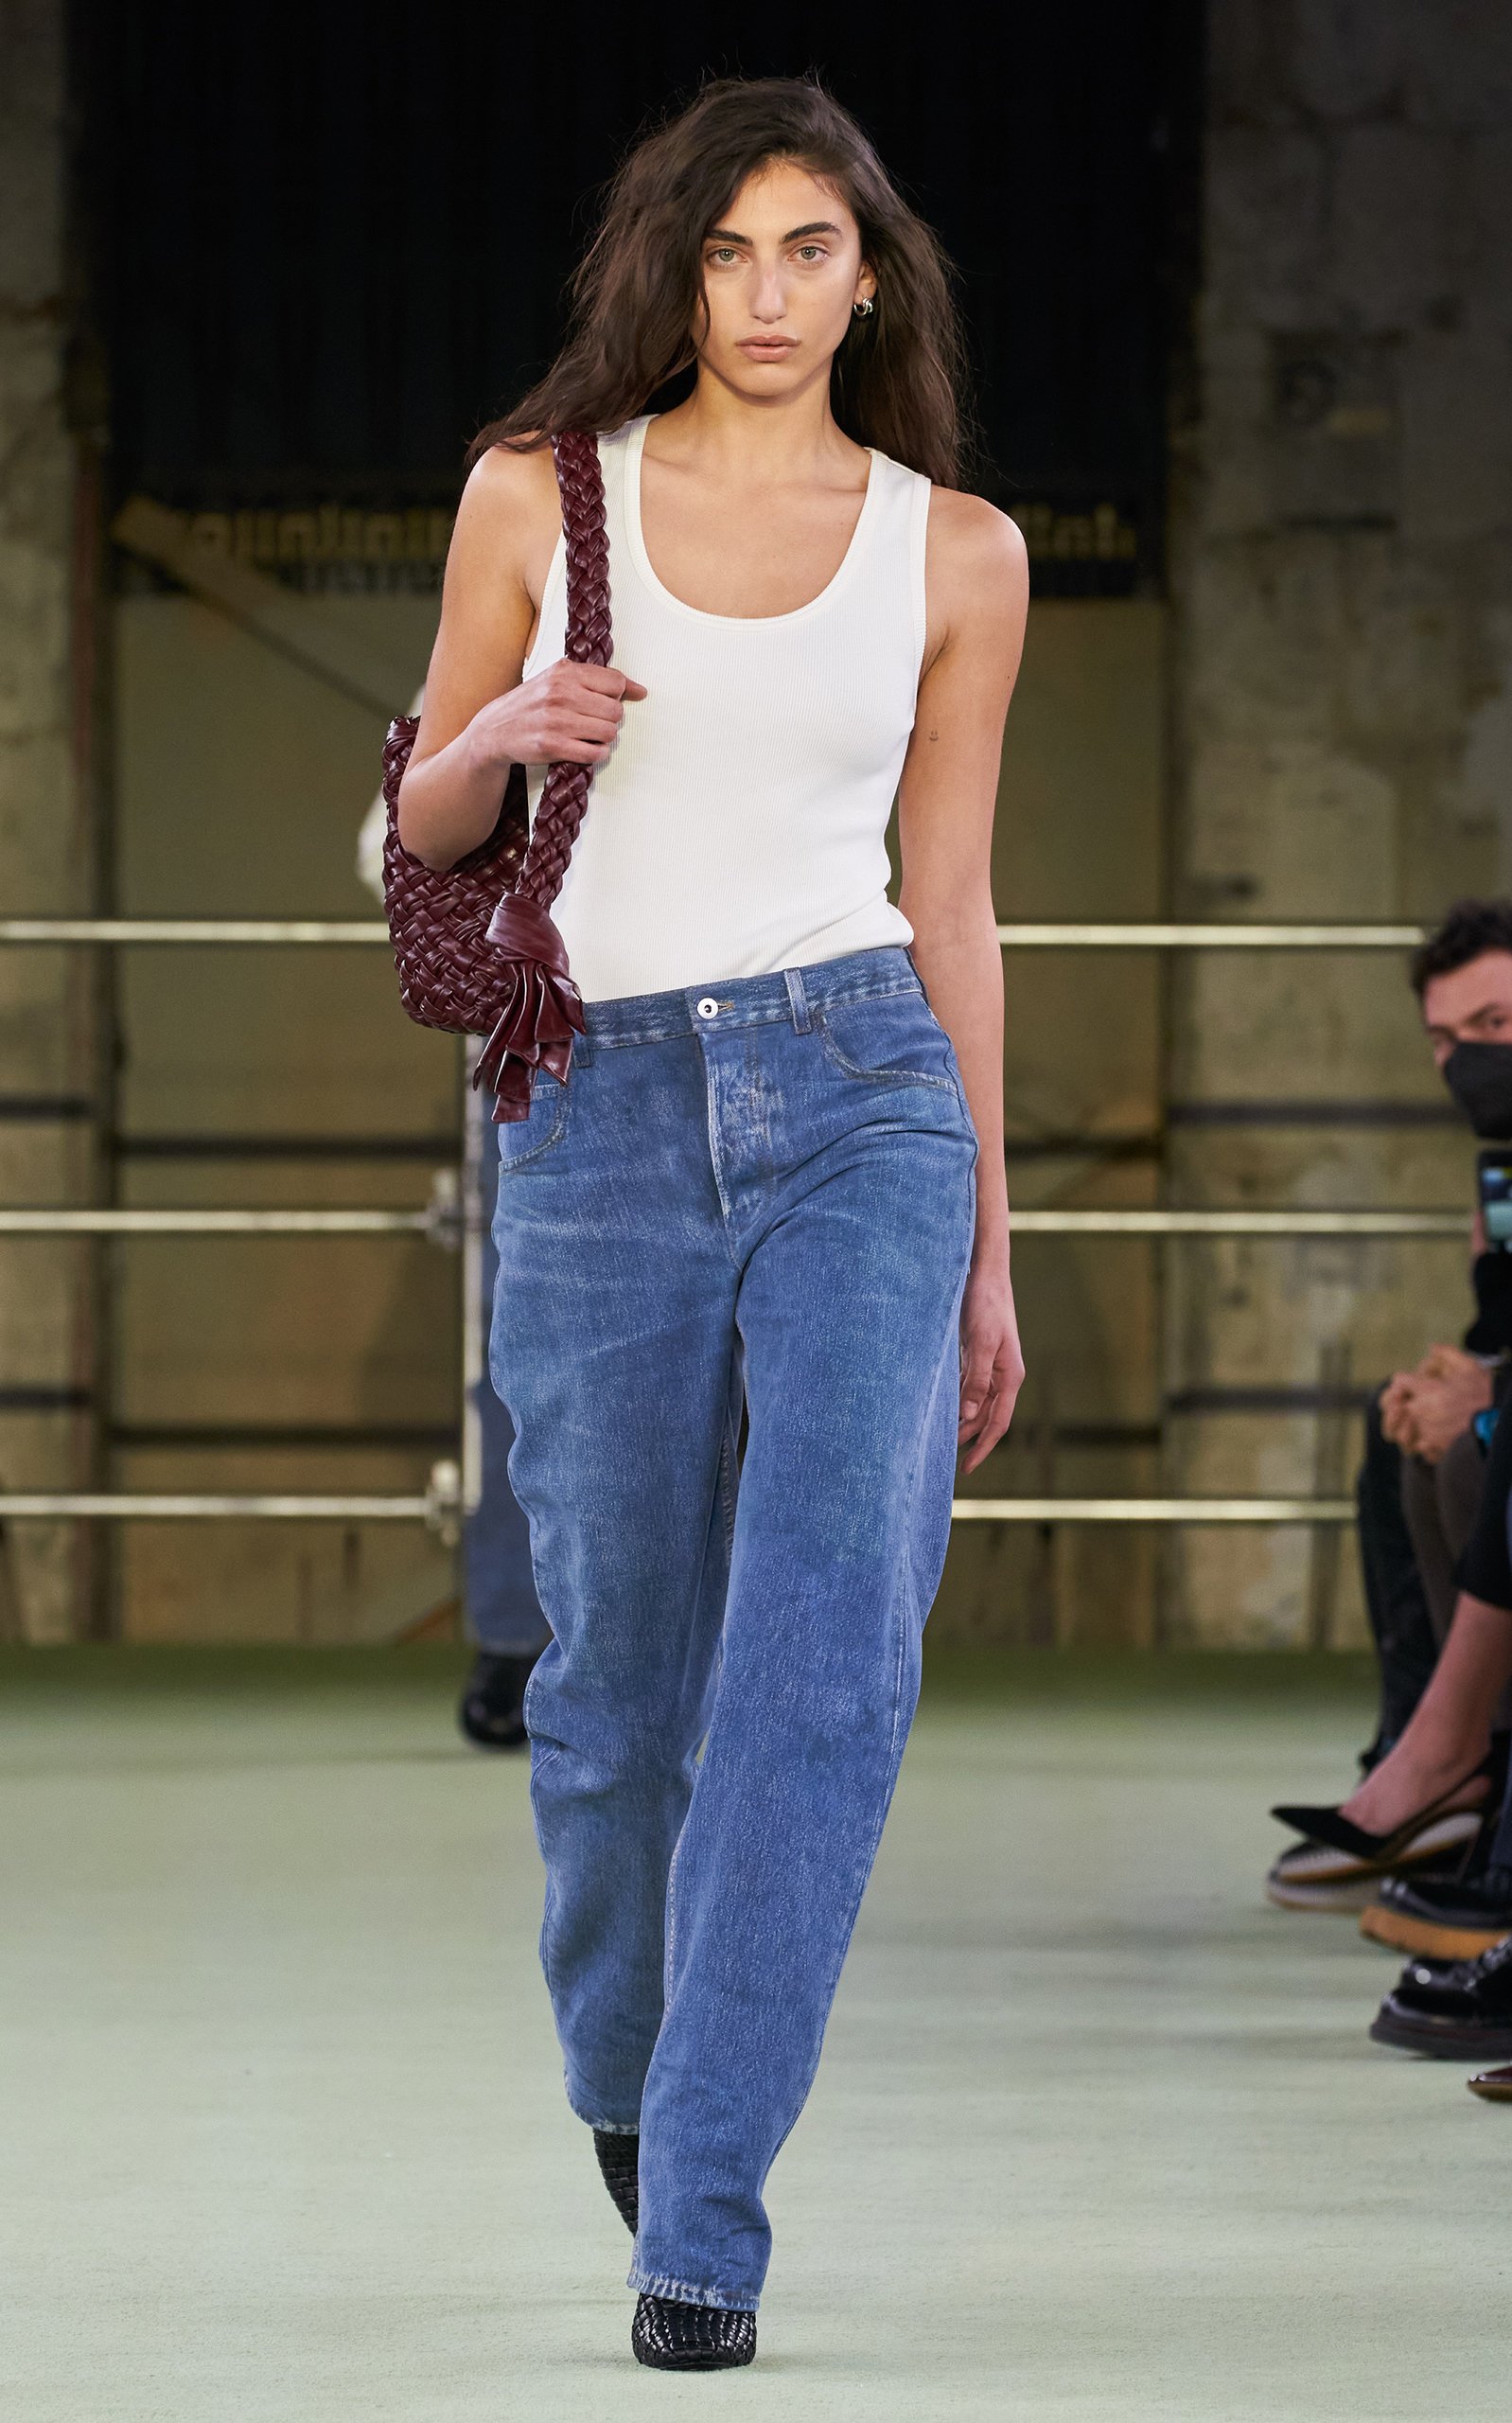 Trompe L’Oeil Is The Surrealist Fashion Trend That Is Taking Over Denim This Fall